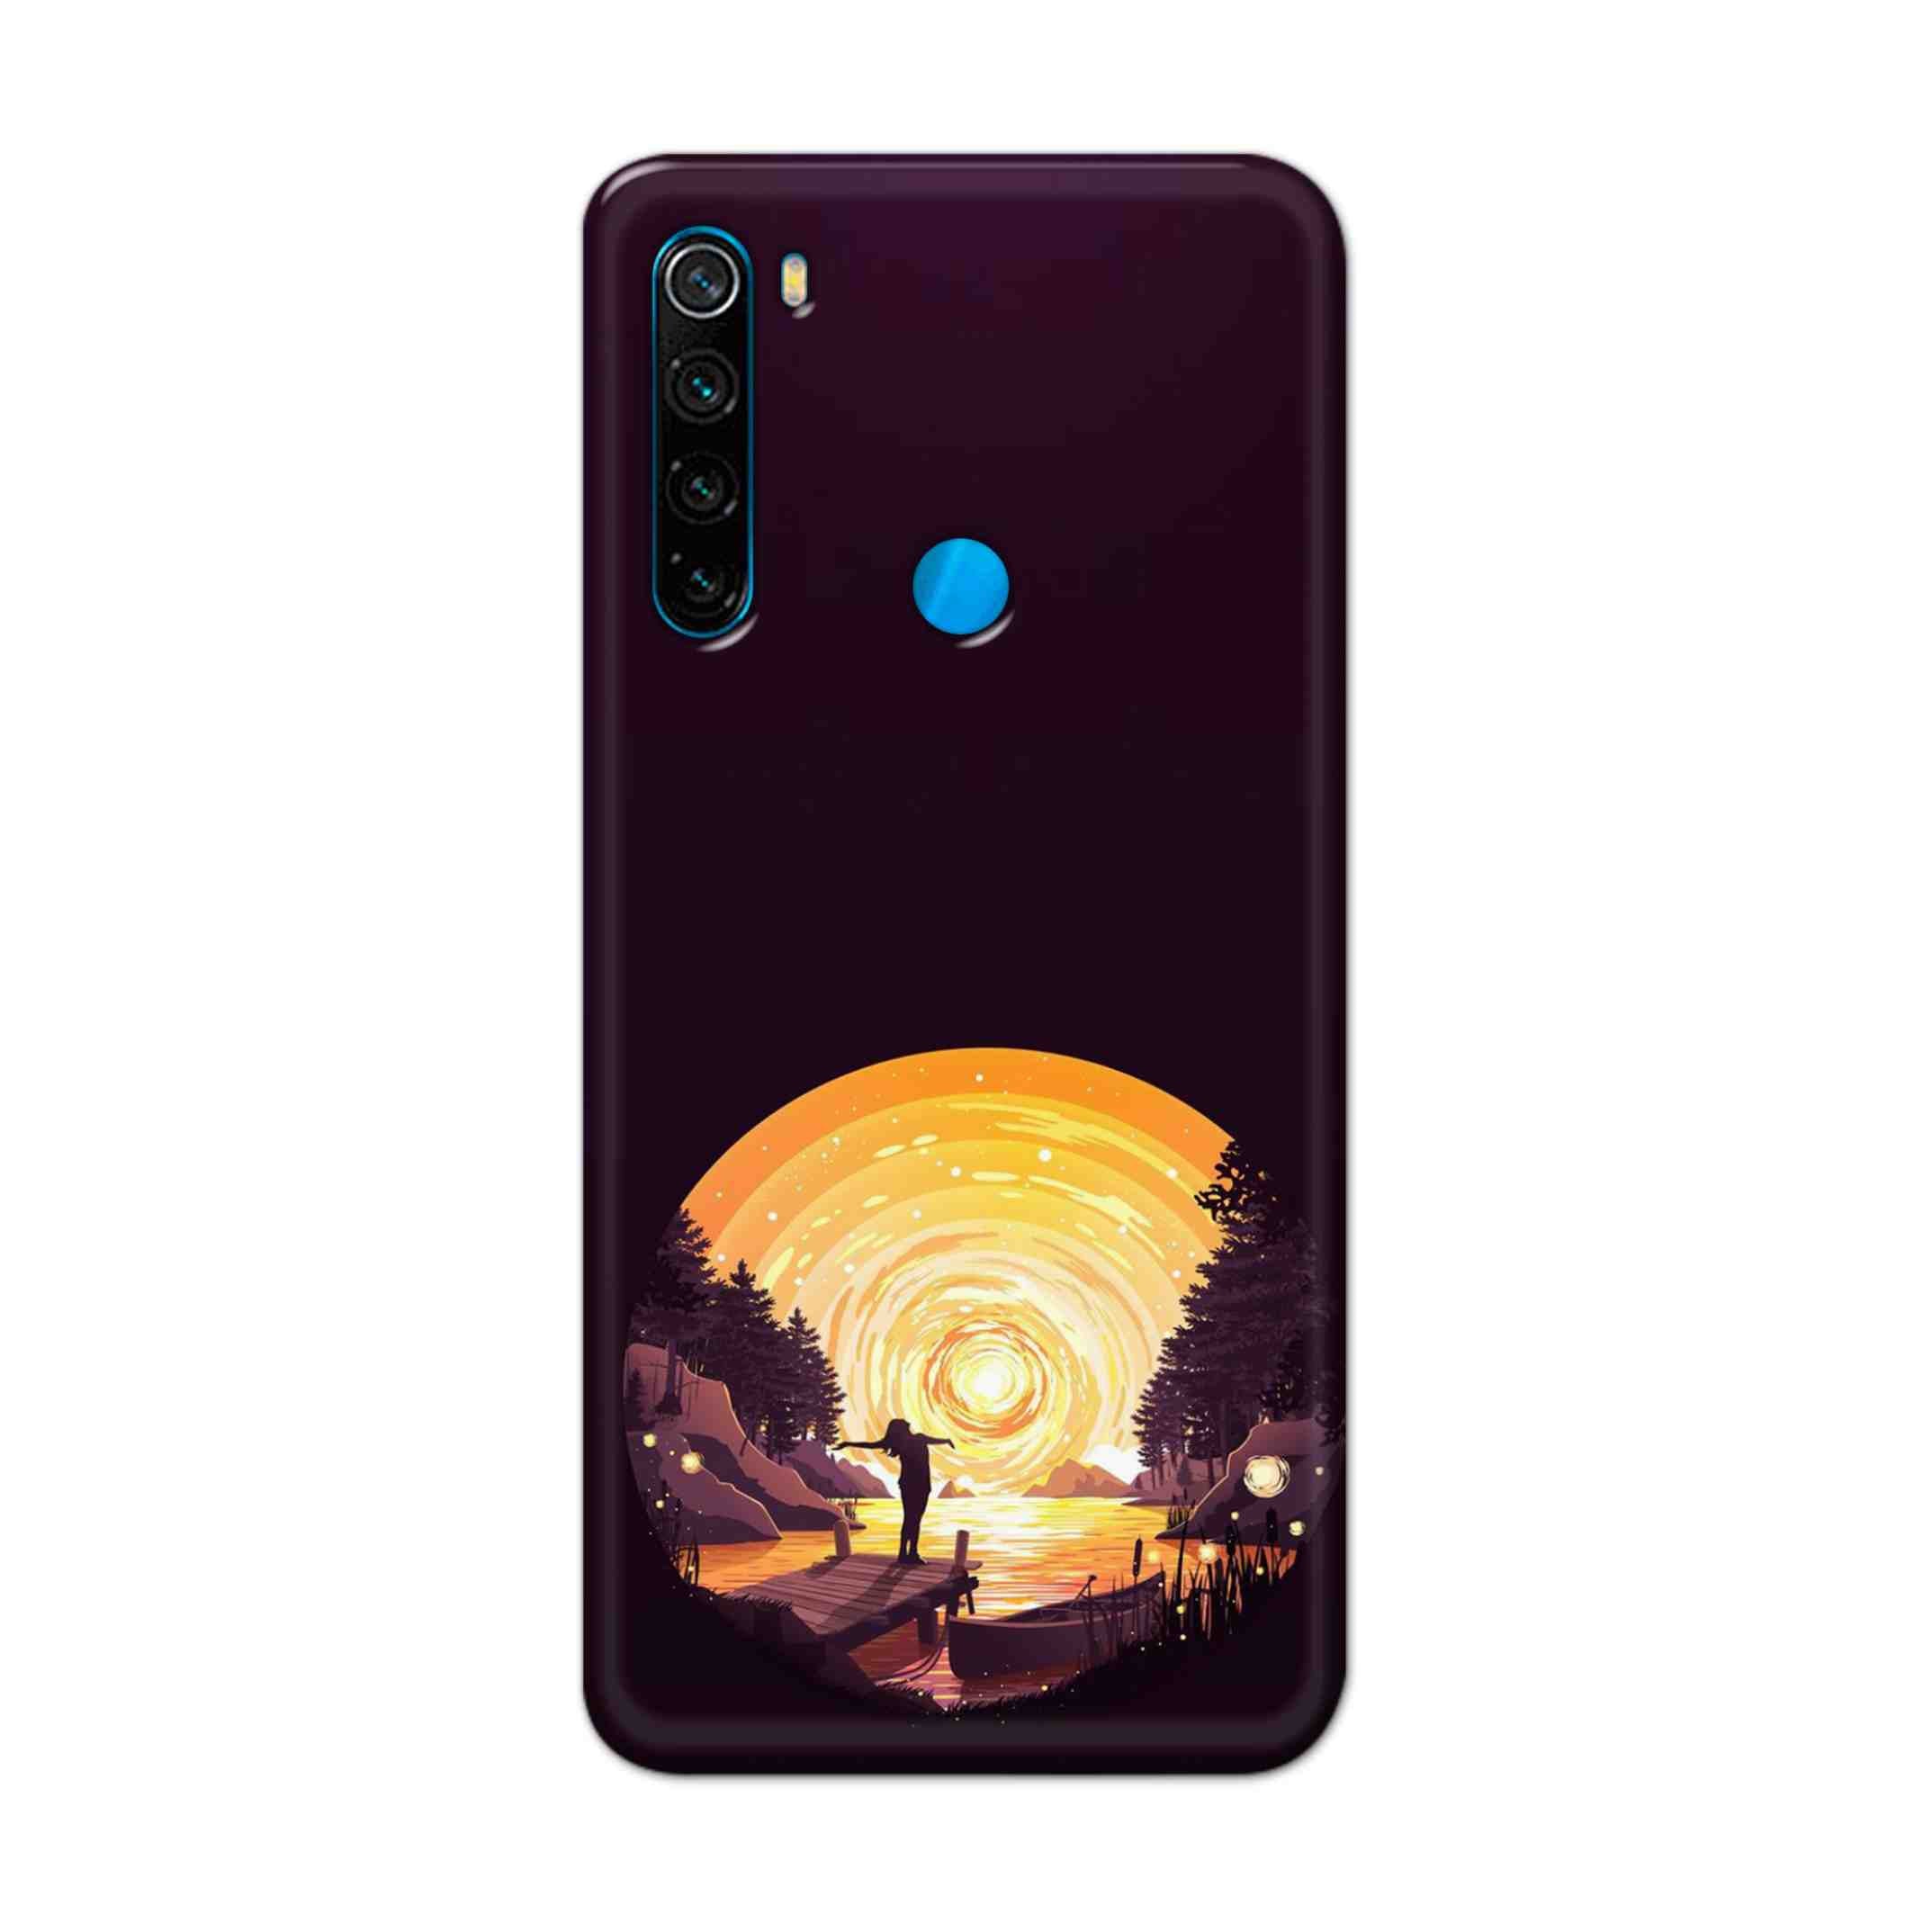 Buy Night Sunrise Hard Back Mobile Phone Case Cover For Xiaomi Redmi Note 8 Online